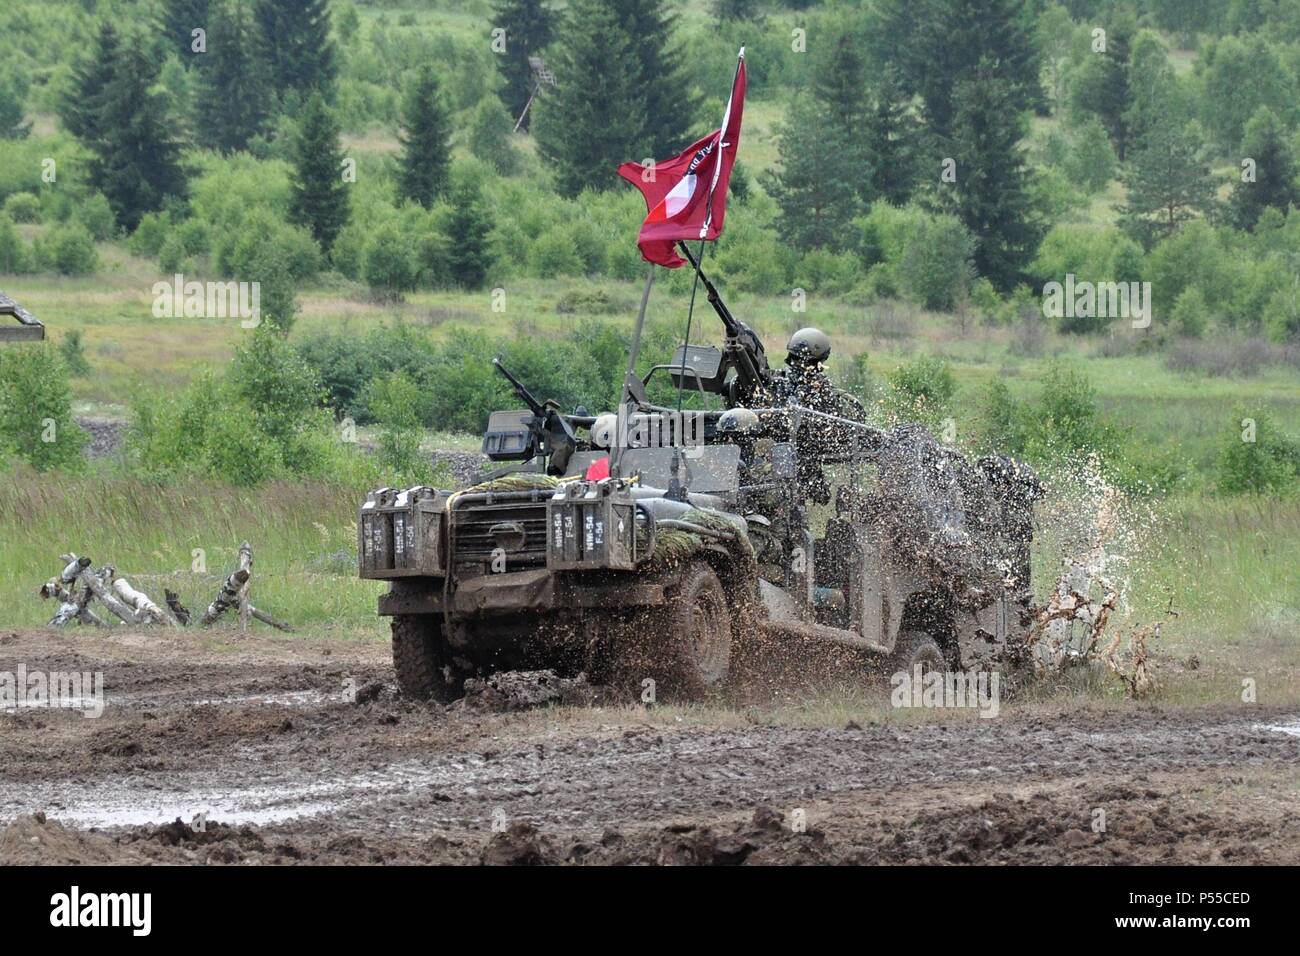 Strasice, Czech Republic. 23rd June, 2018. Land Rover Defender 130 vehicle is seen during the Ground Force Day Bahna 2018, presentation of military equipment and activities, in Strasice, Czech Republic, on June 23, 2018. Credit: Lada Peskova/CTK Photo/Alamy Live News Stock Photo